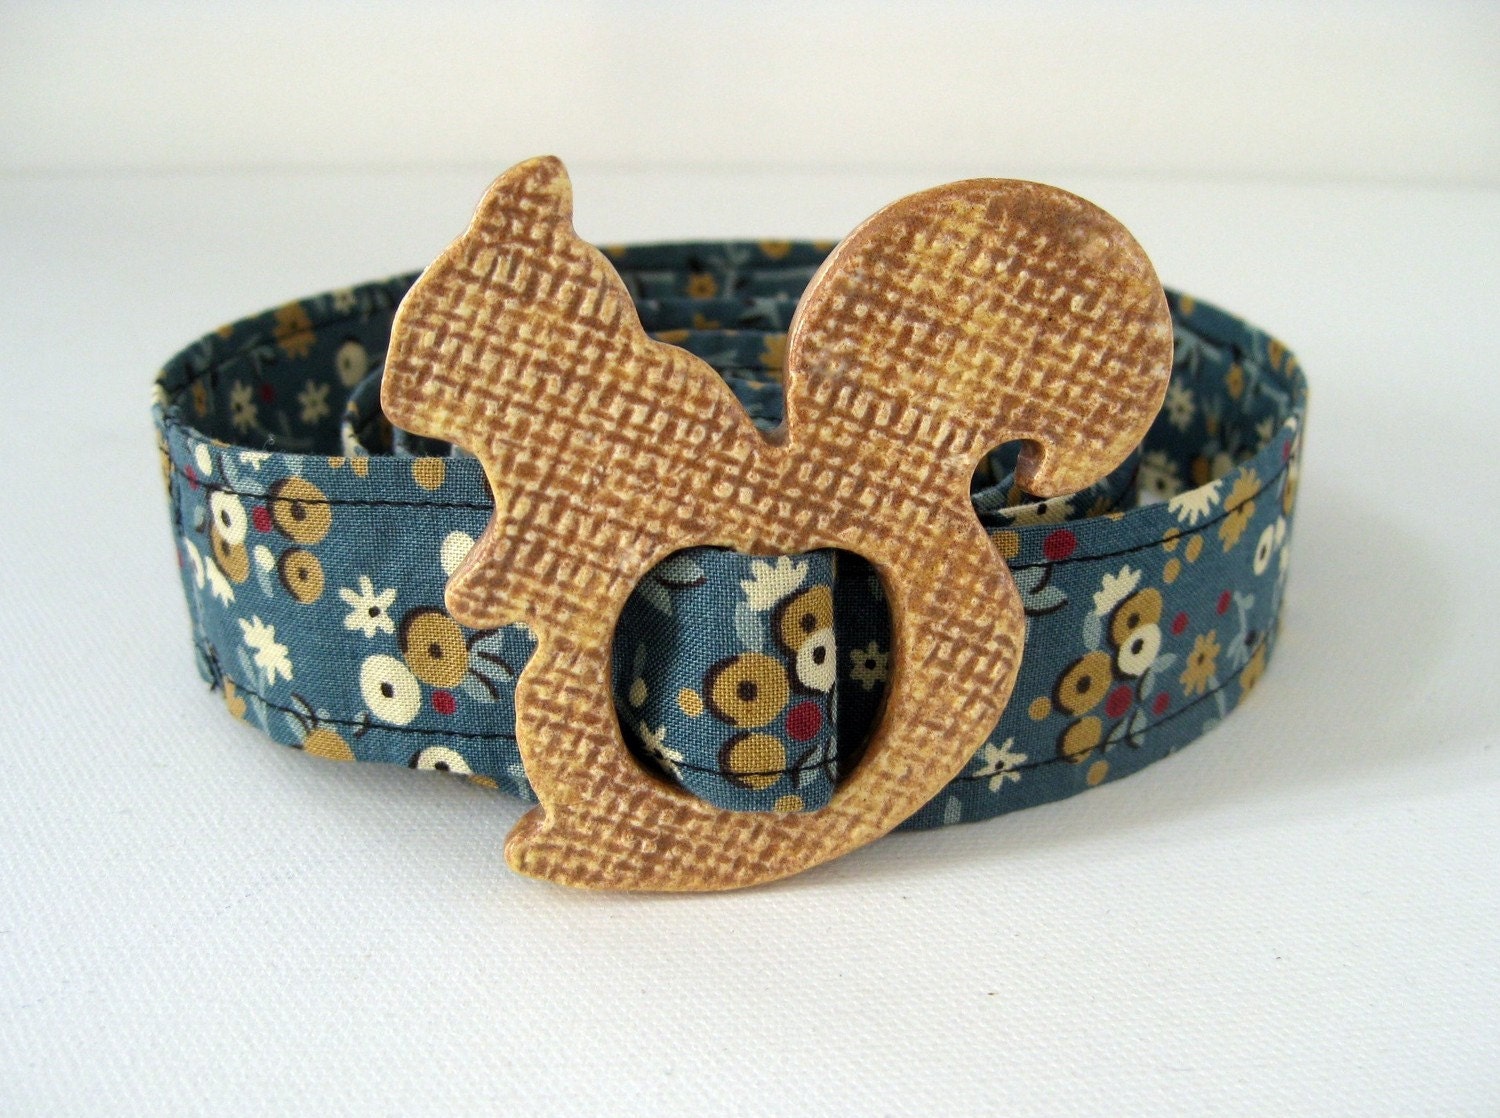 Ceramic Squirrel Buckle with Vintage Reproduction Fabric Belt